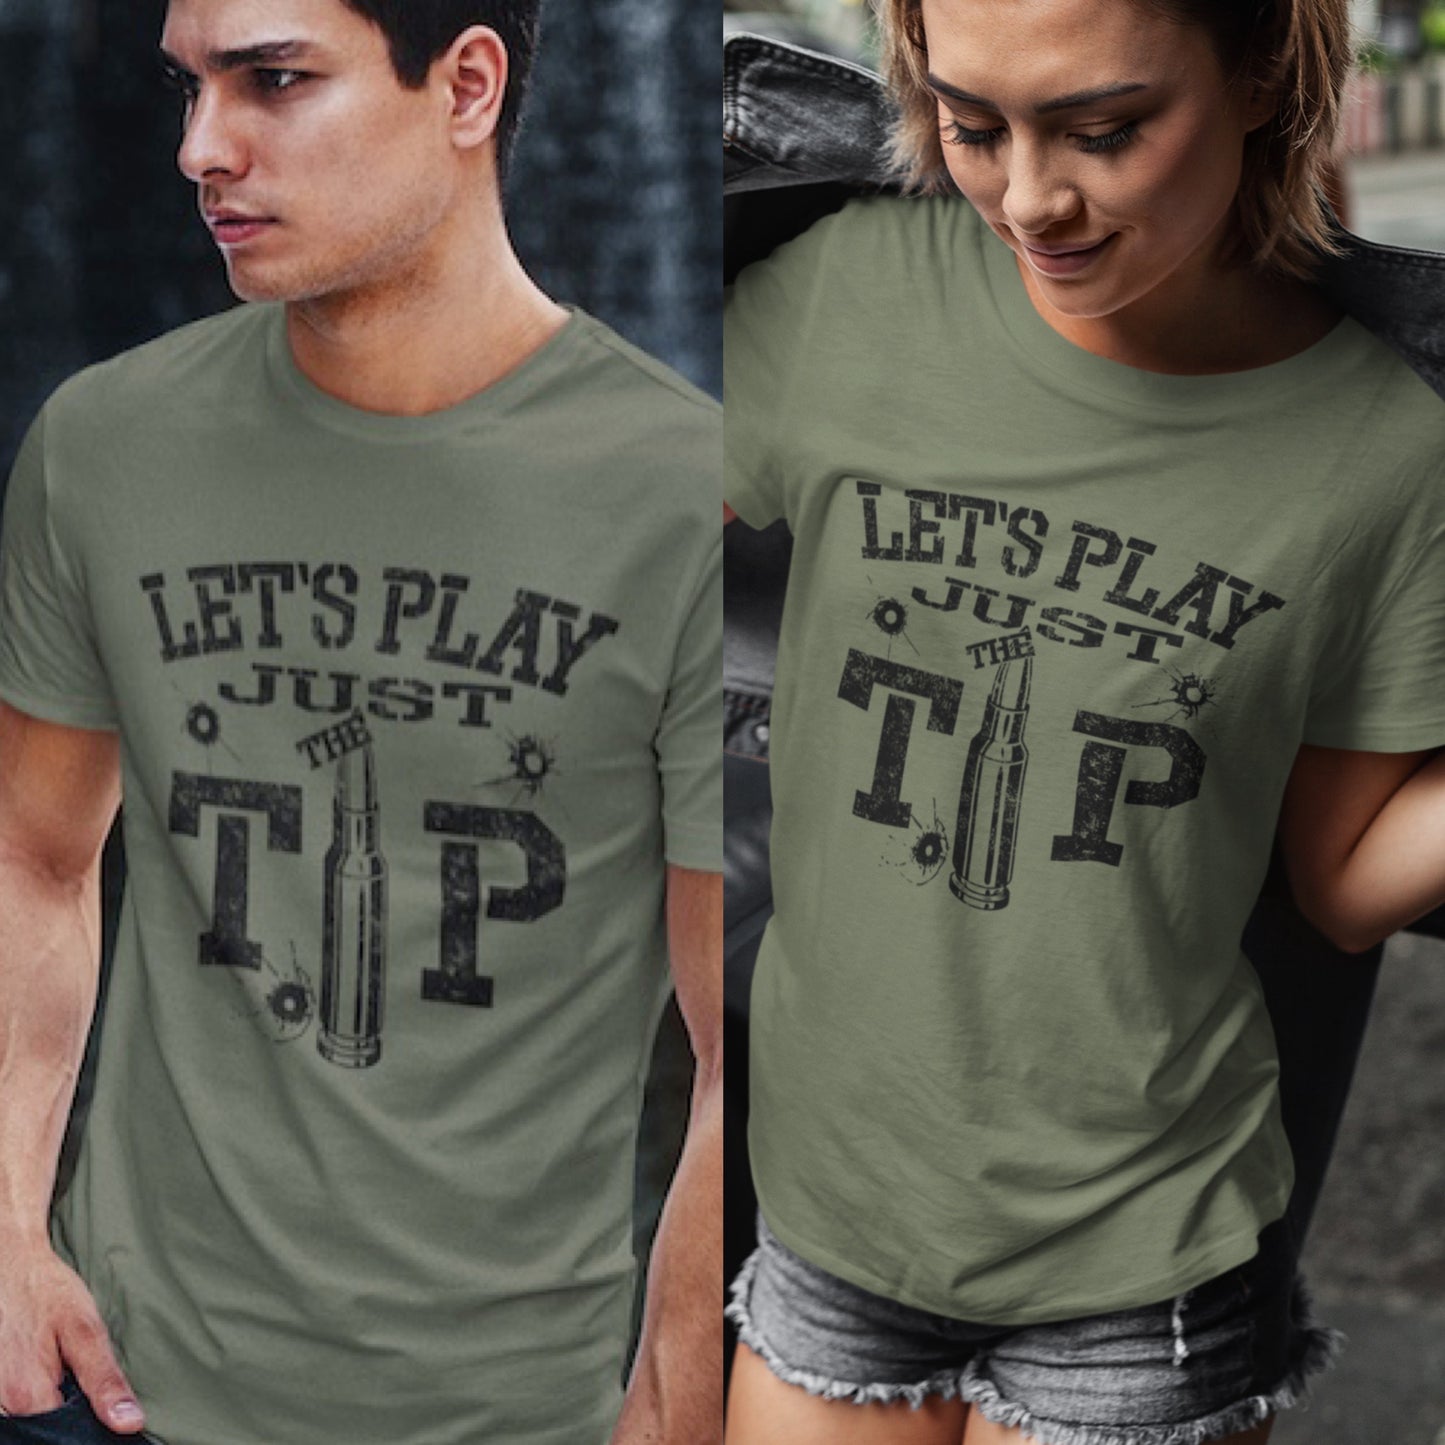 LETS PLAY JUST THE TIP UNISEX